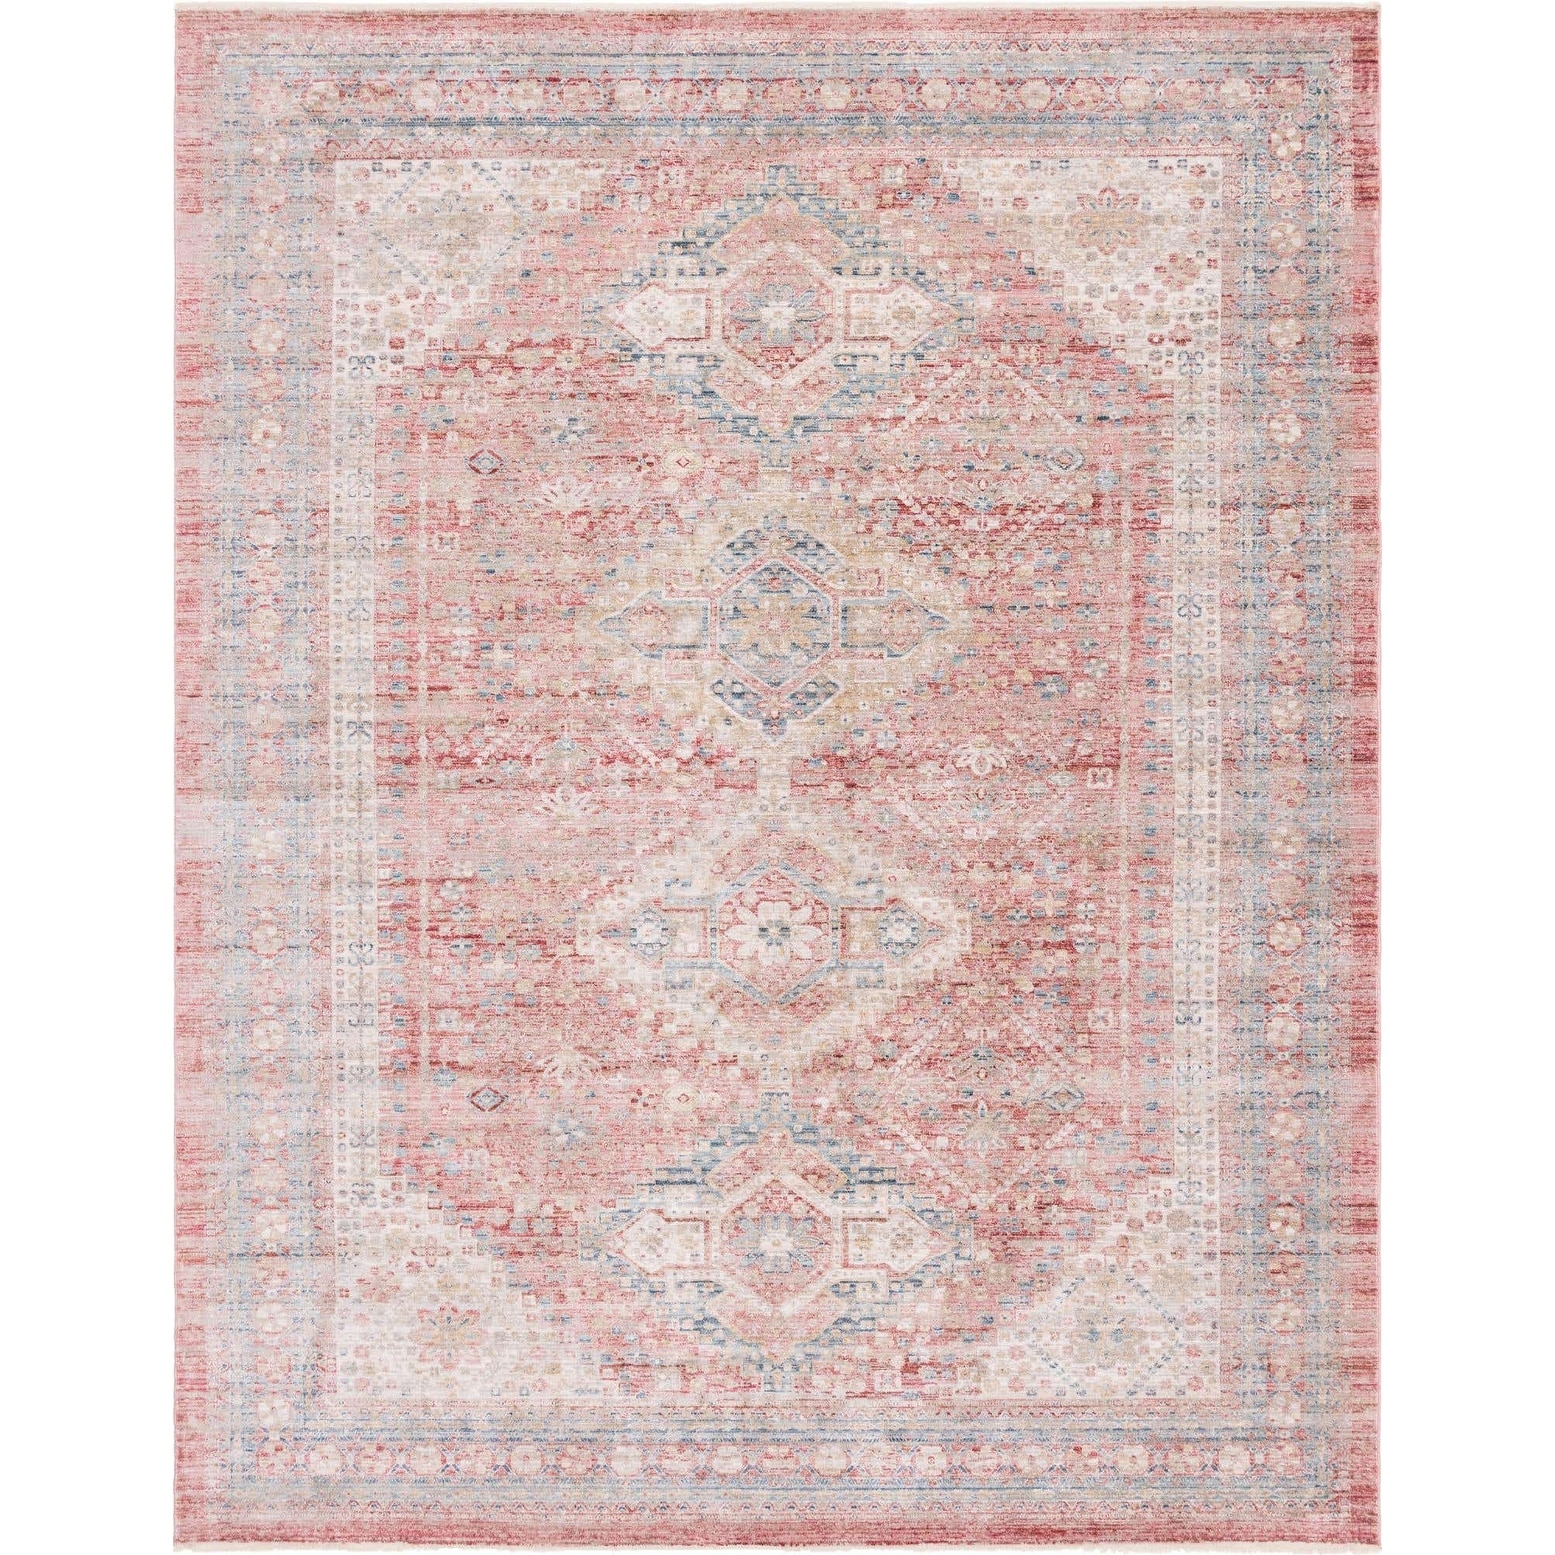 Vintage Area Rug Unique Loom Noble Collection Traditional Border Country Geometric 5' 1 x 5' 1 Round, Gray/Blue 